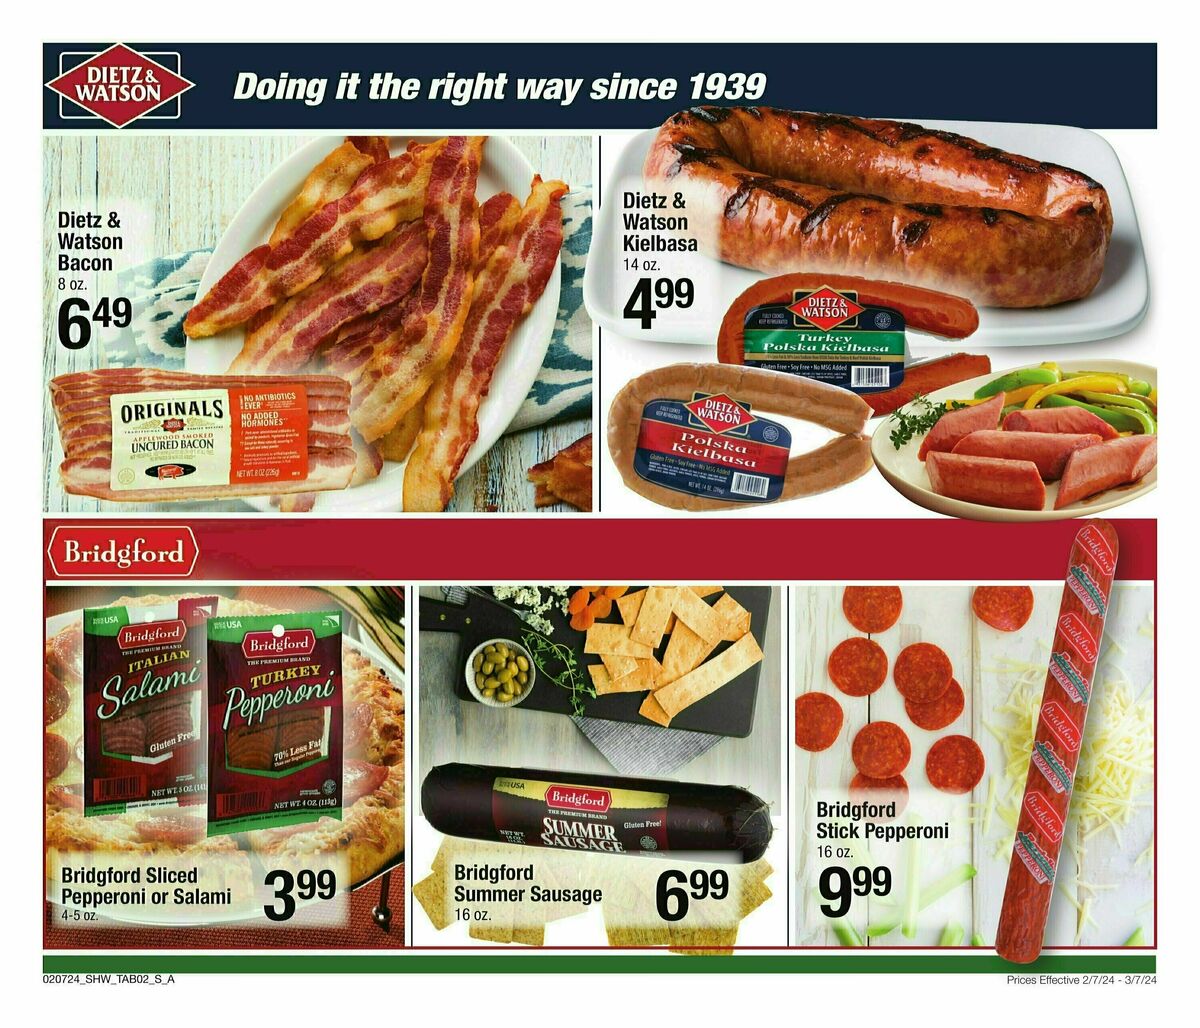 Shaw's Big Book of Savings Weekly Ad from February 7